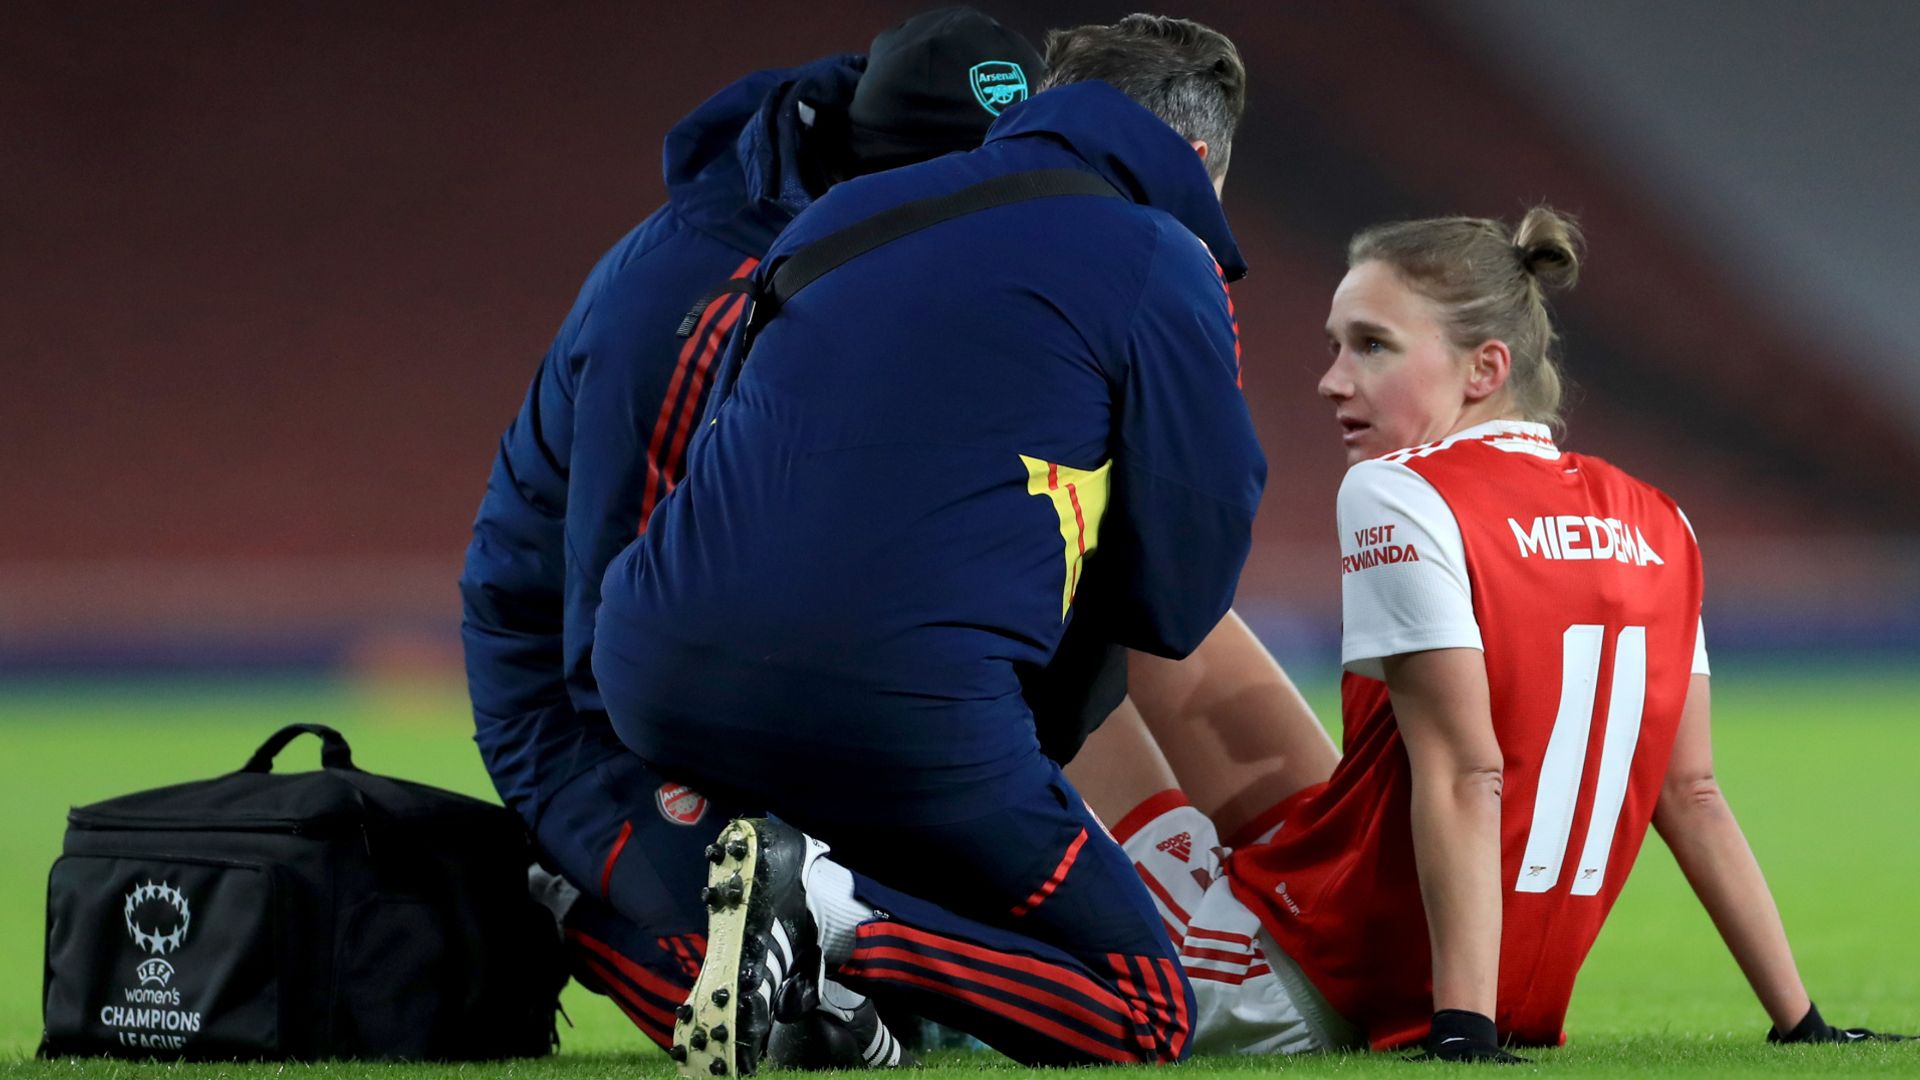 Miedema to undergo surgery on ACL injury | 'I'm absolutely gutted'